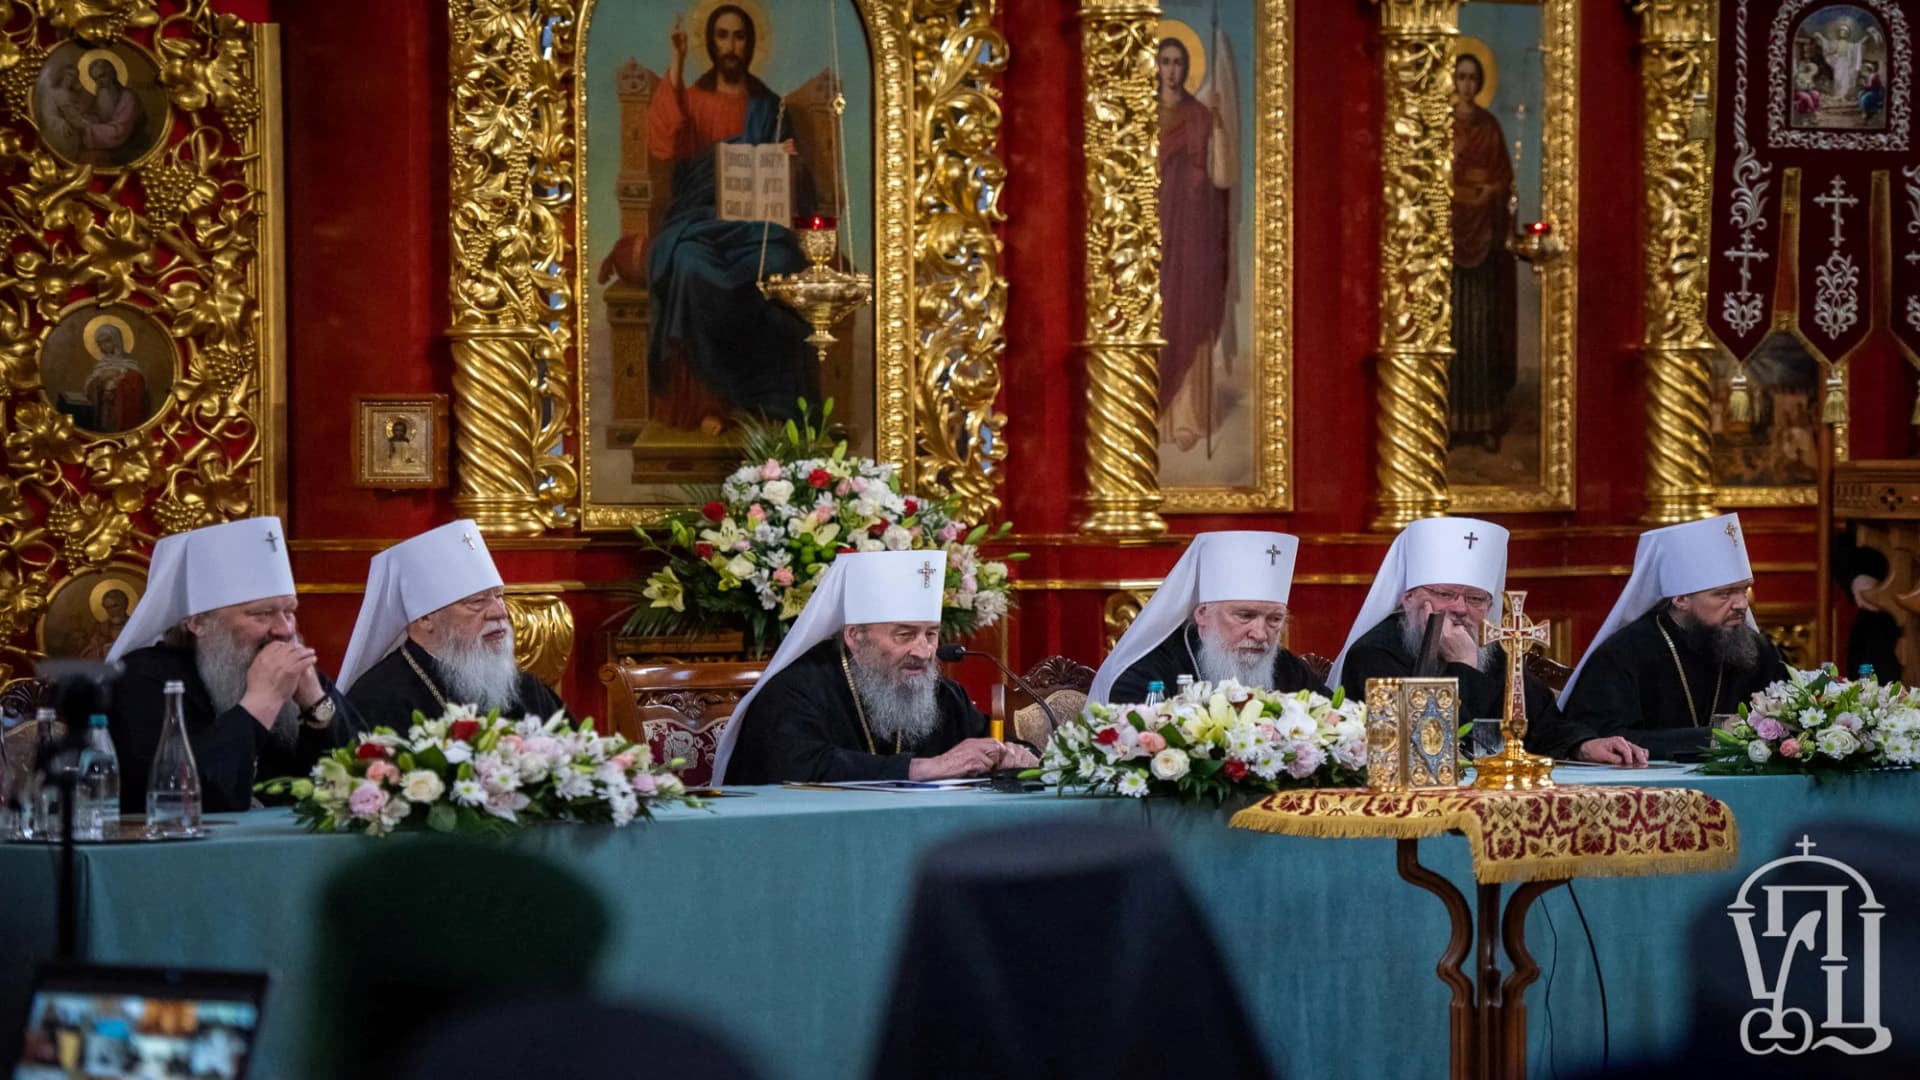 Clergy members of a branch of Ukraine's Orthodox Church attend a council meeting at St. Panteleimon Monastery, as the branch discusses breaking its ties with the Russian church over Russia's invasion of Ukraine, in Kyiv, Ukraine, May 27, 2022. 